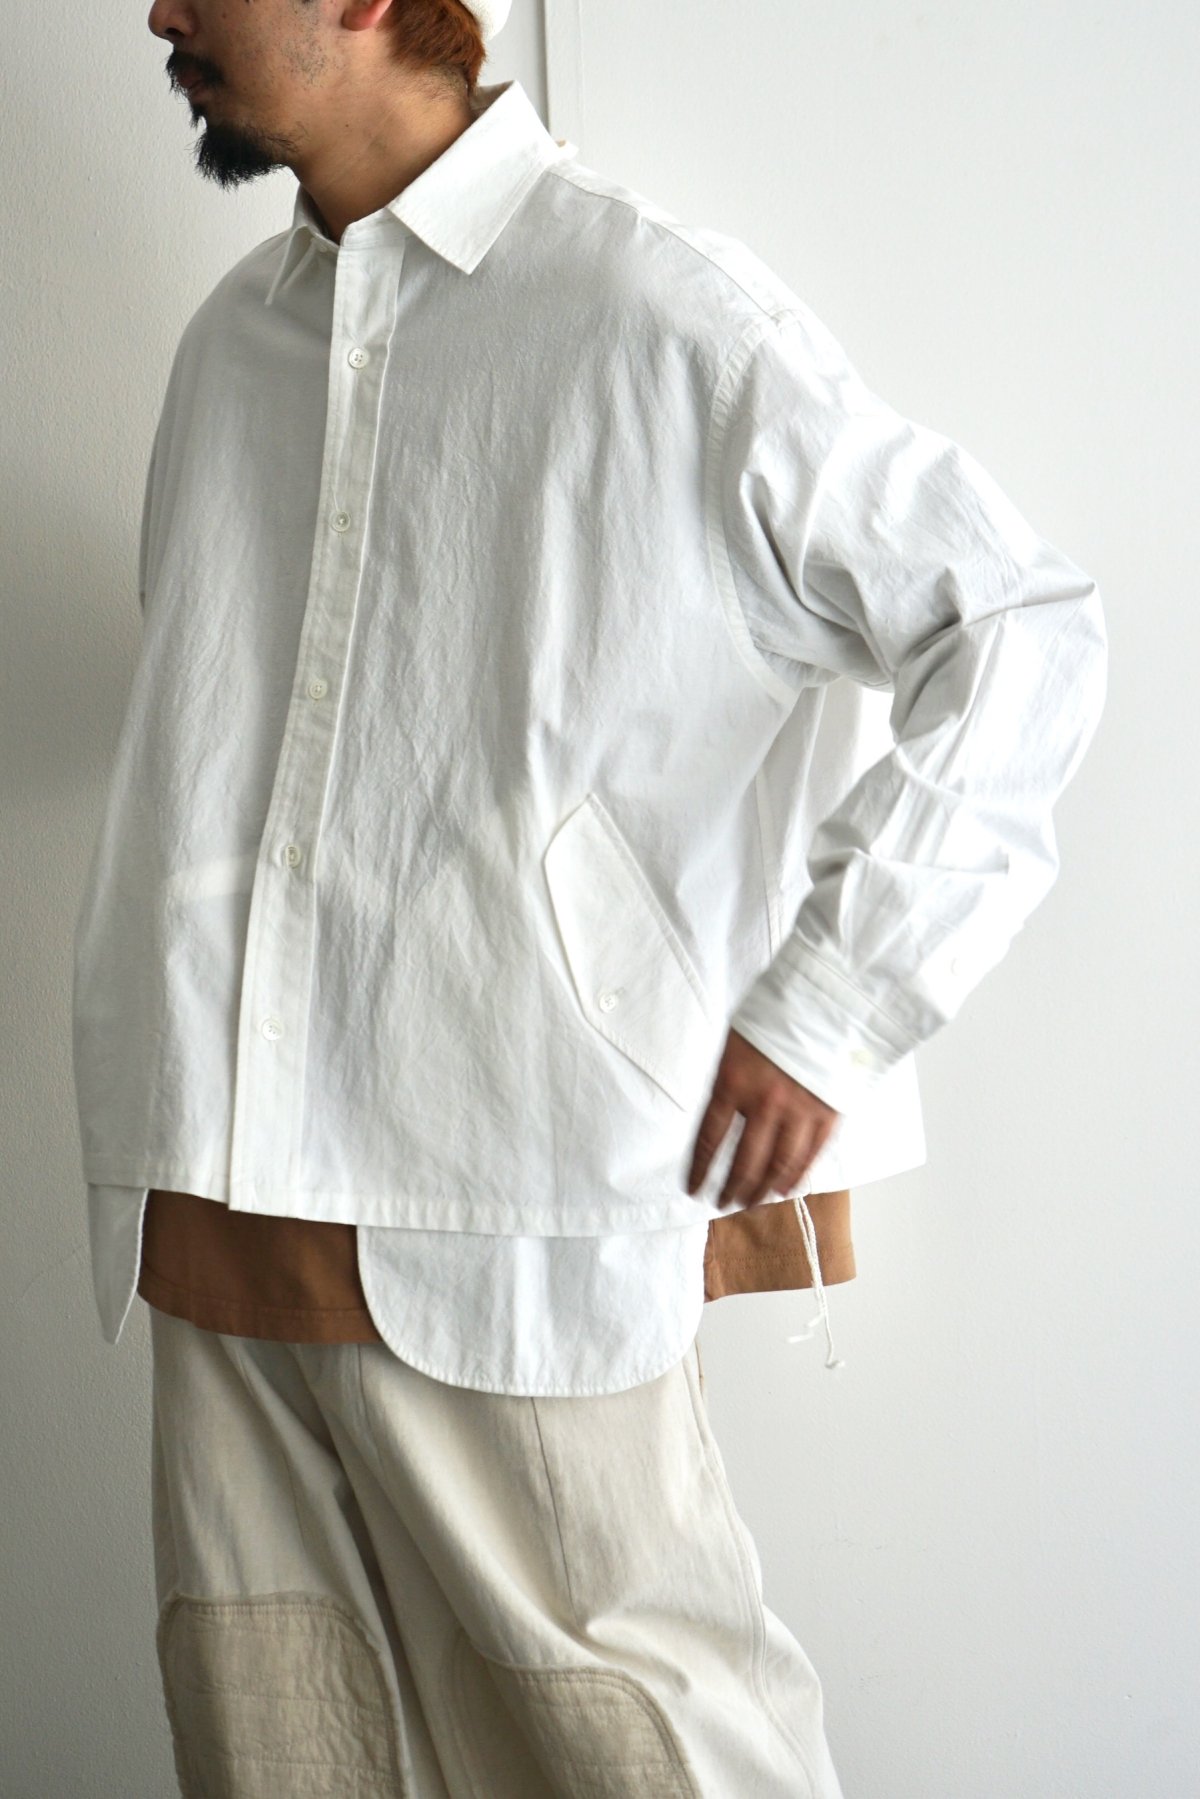 MERELY MADE / VINTAGE NAP CROPPED SHIKET / WHITE